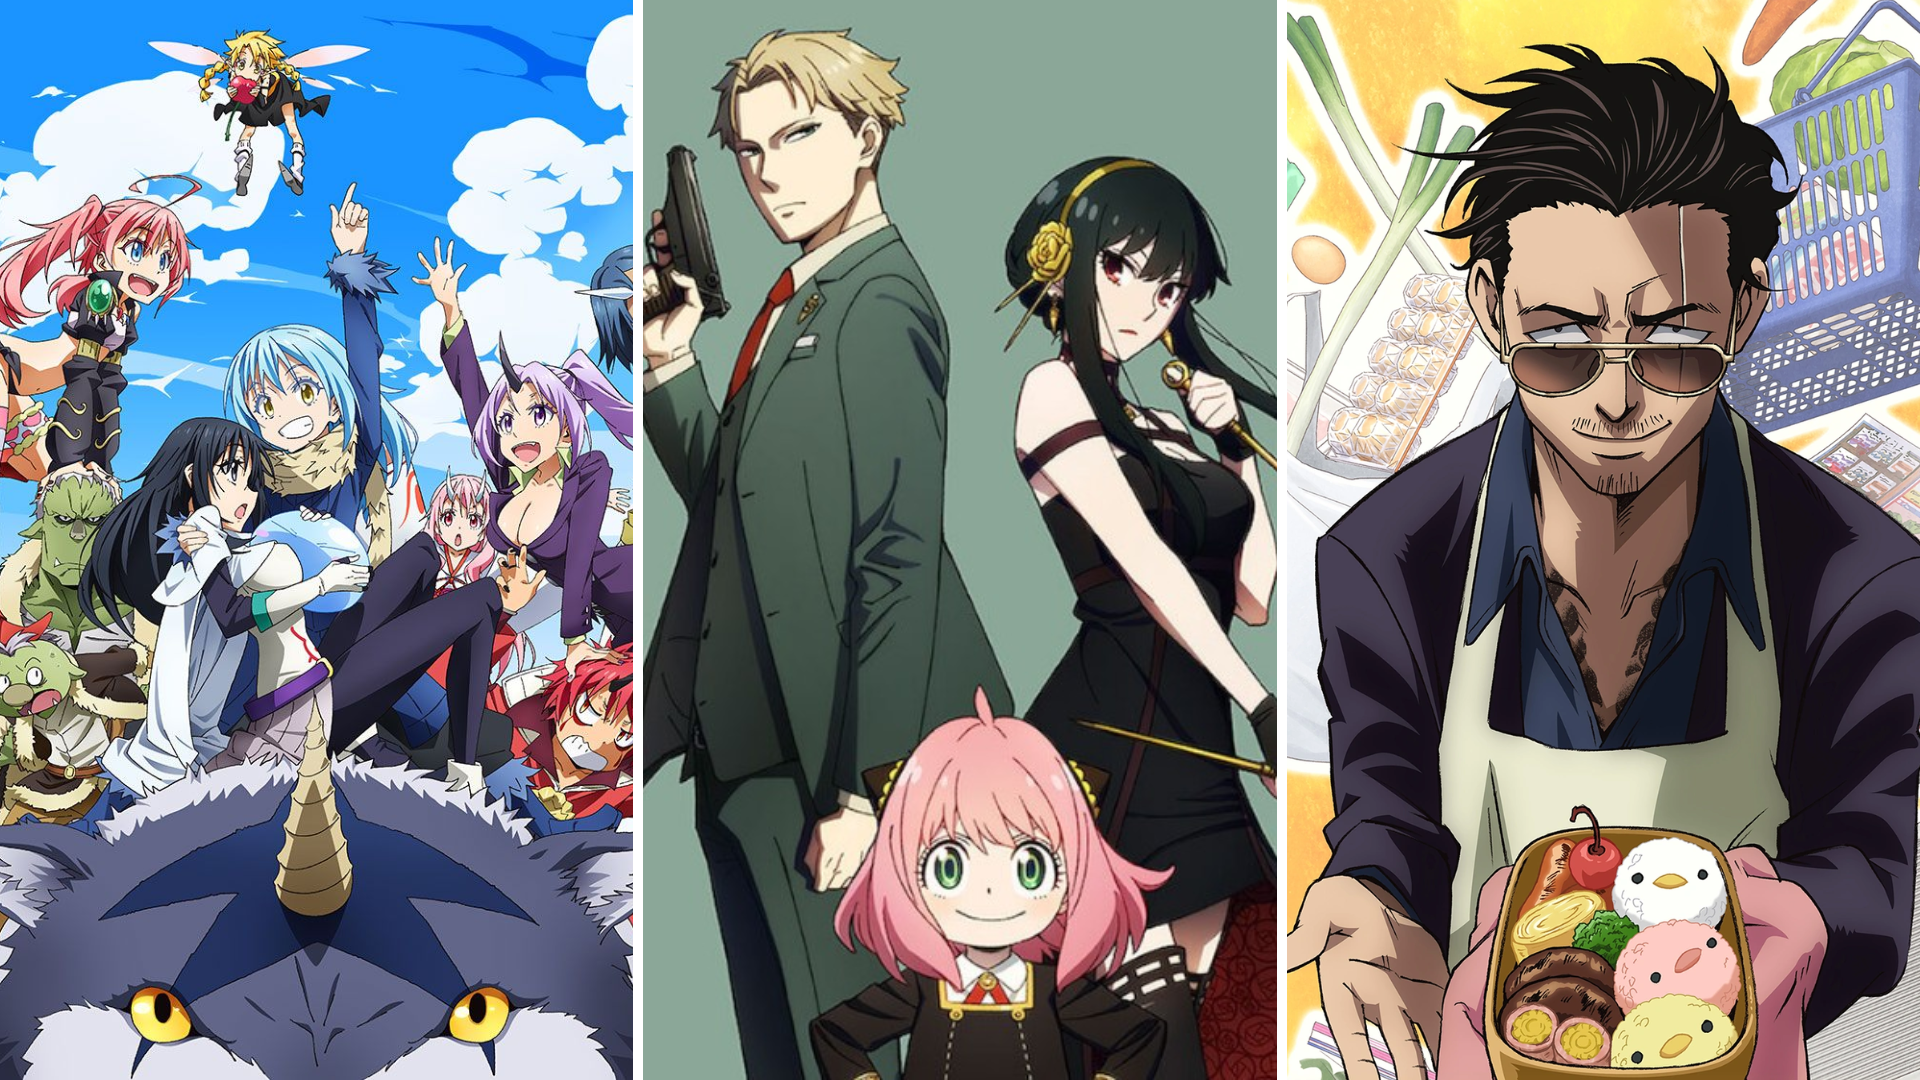 The Best Anime of 2019  Top 10 New Anime Movies and Series to Watch